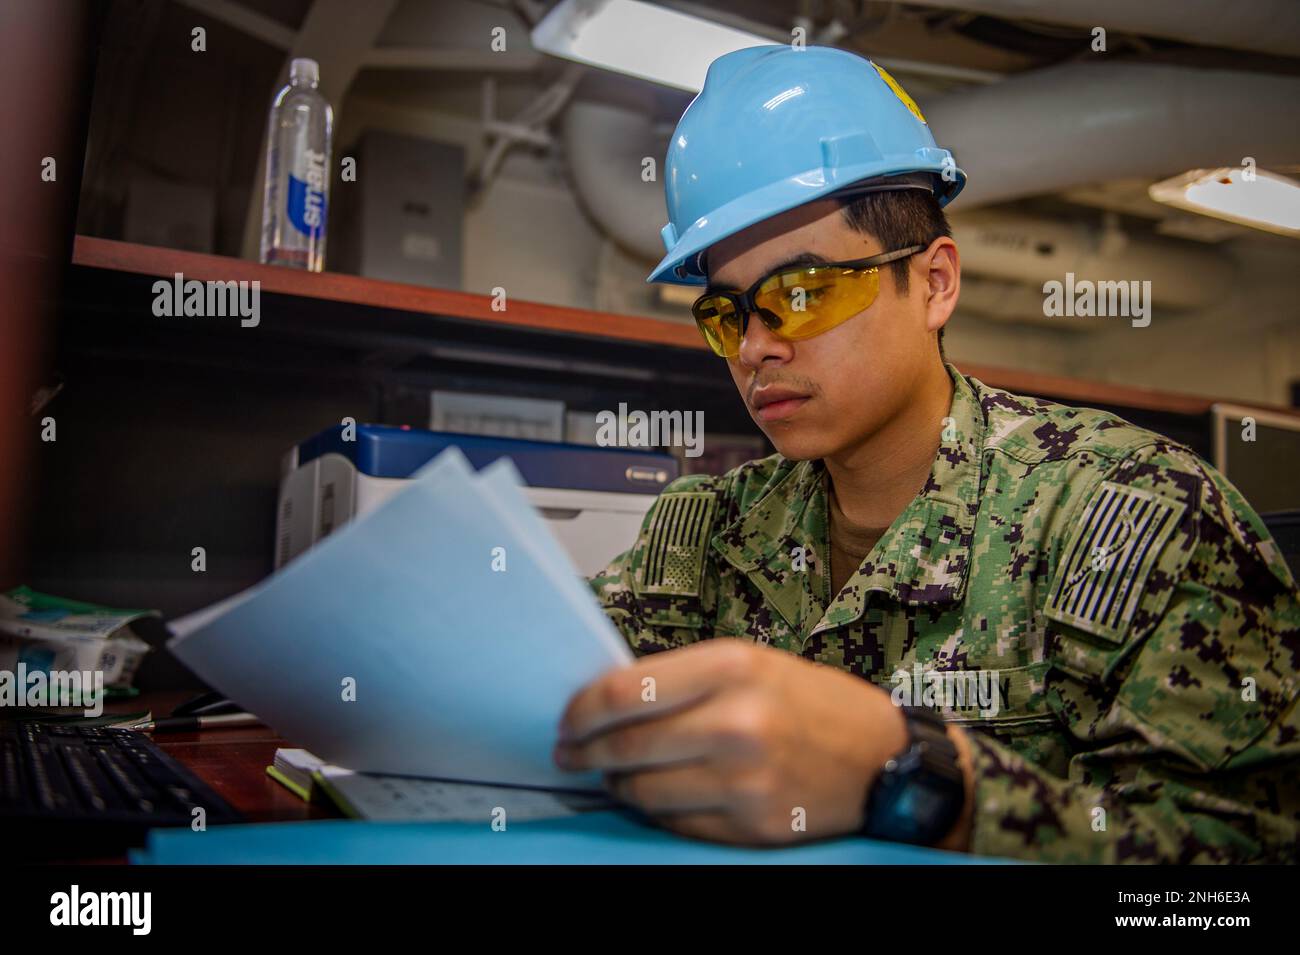 220719-N-IP029-1026 PORTSMOUTH, Va. (Jul. 19, 2022) Personnel Specialist Seaman Recruit Joseph O’Donnell, from Centreville, Virginia, reviews paperwork aboard the Nimitz-class aircraft carrier USS Dwight D. Eisenhower (CVN 69). Ike is currently pierside at Norfolk Naval Shipyard in the basic phase of the optimized fleet response plan (OFRP). Stock Photo